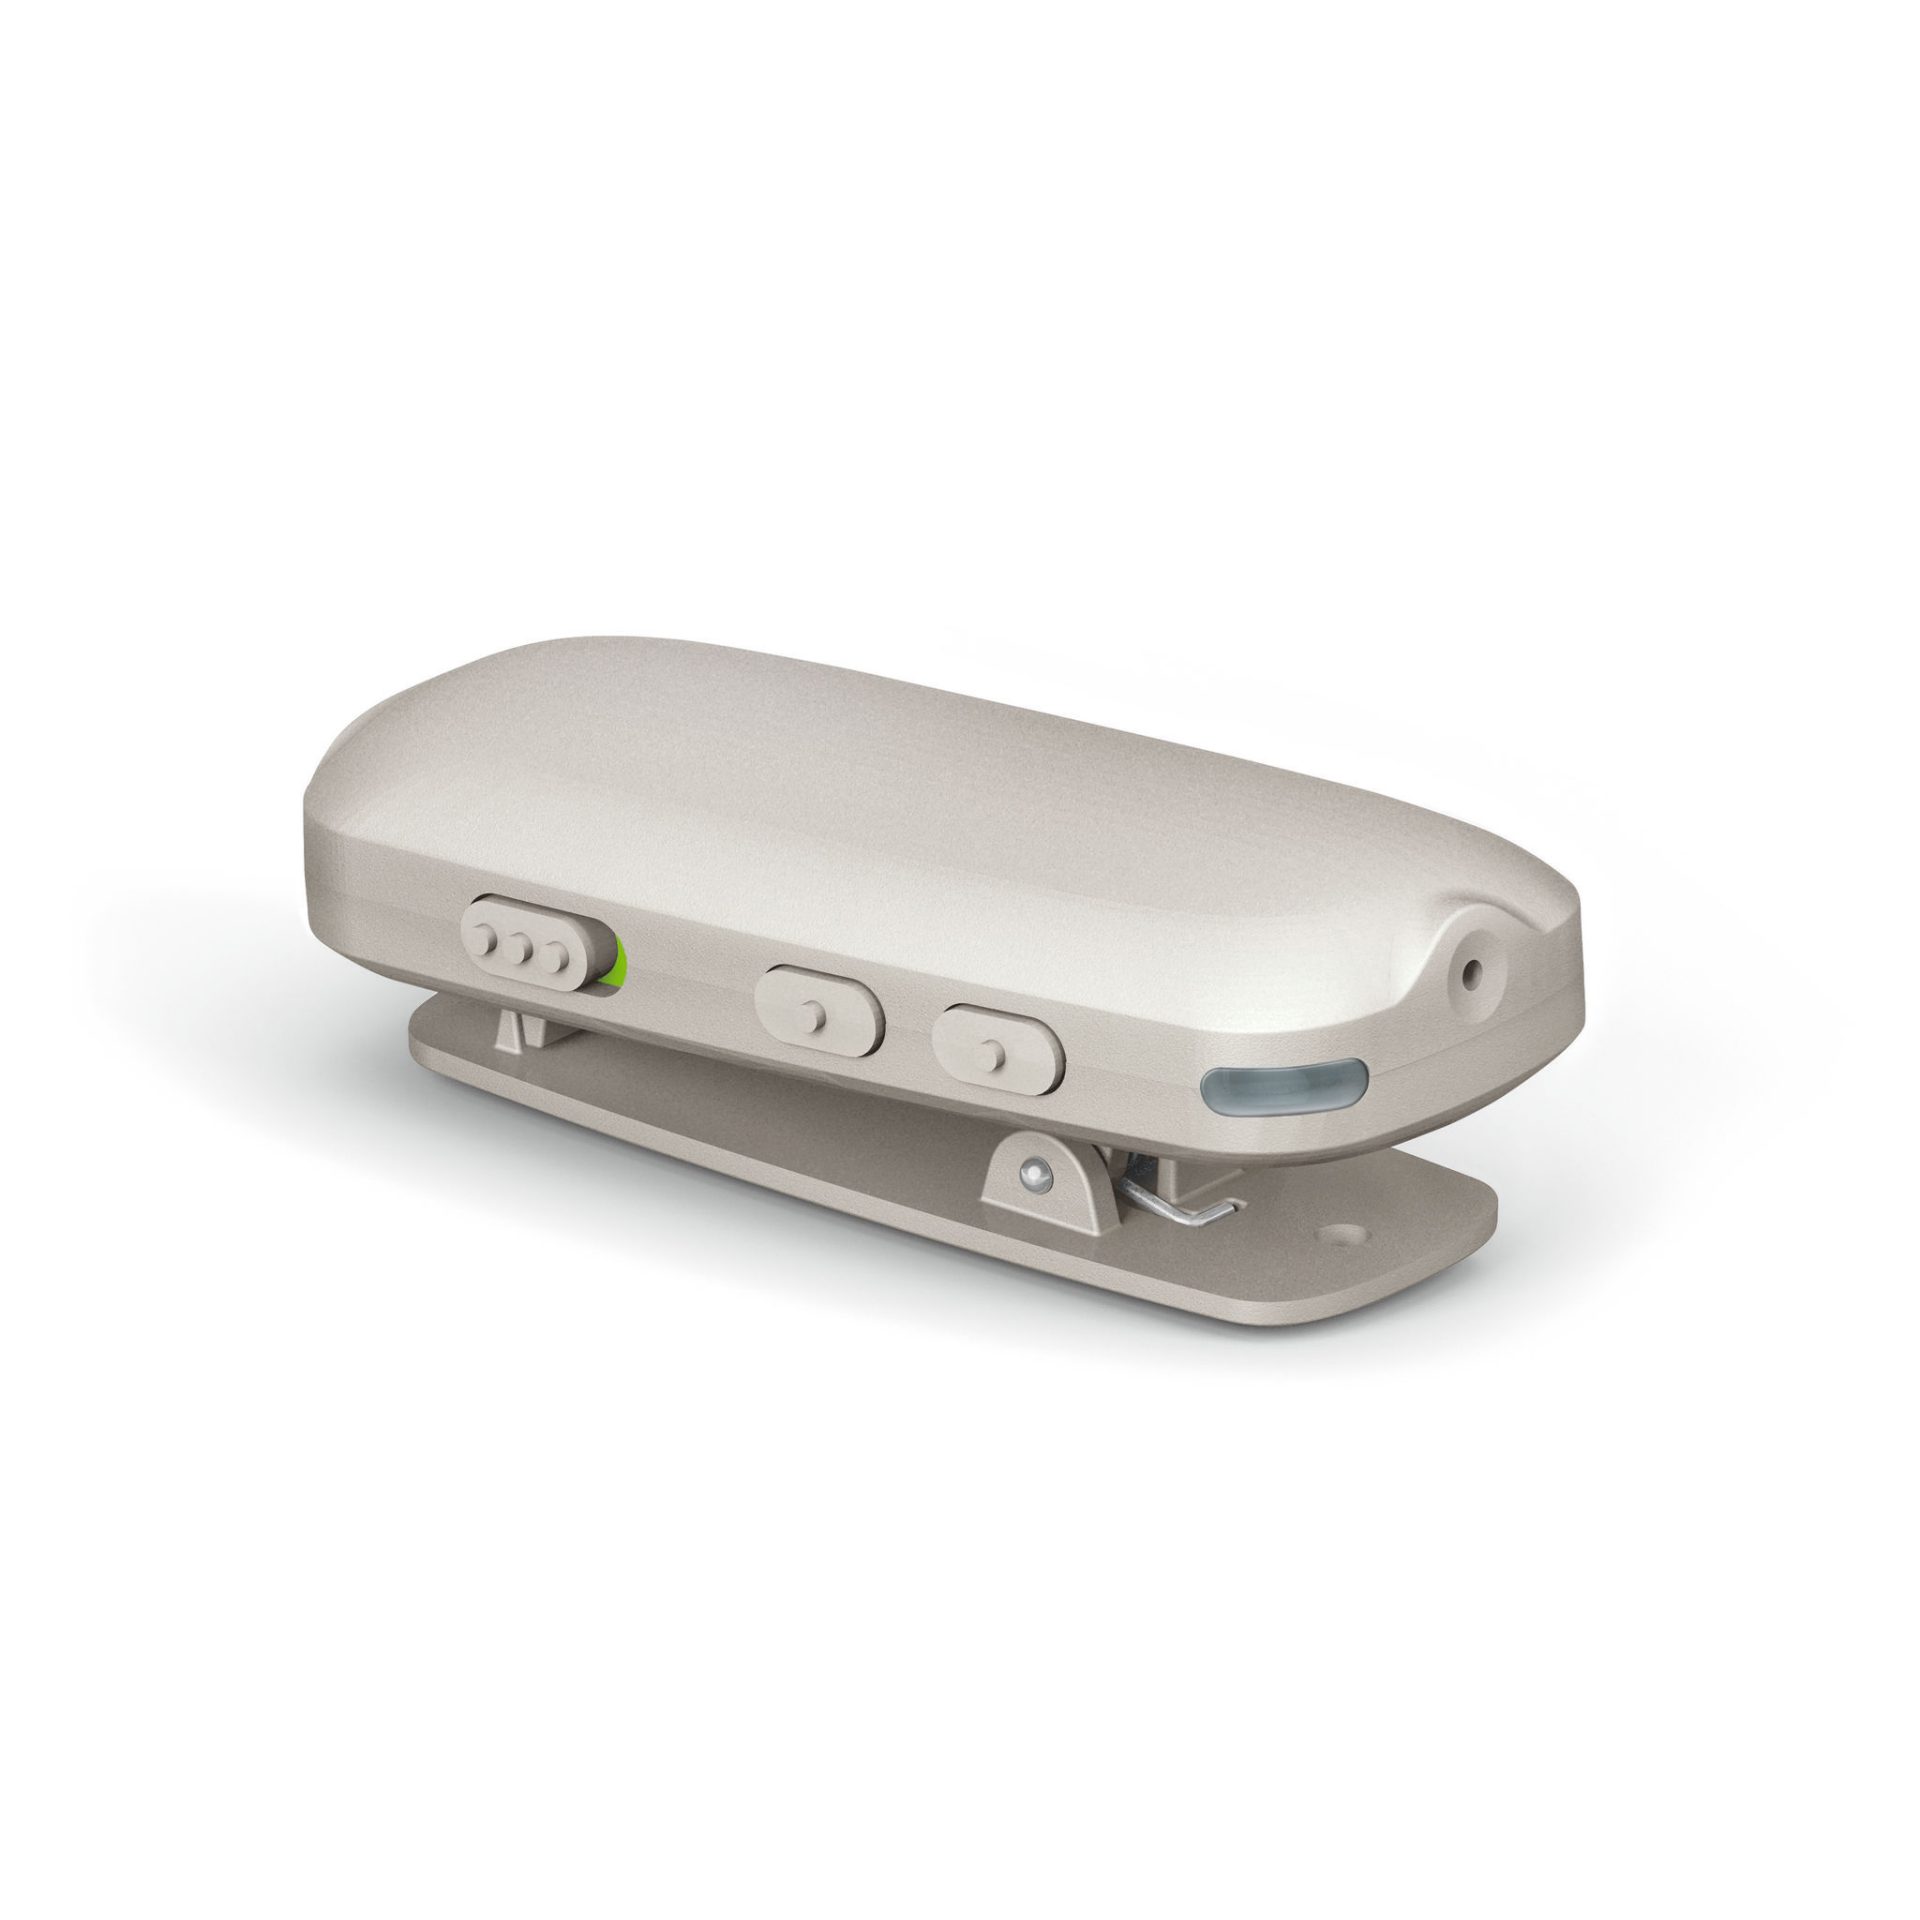 Photo of a Phonak Roger device